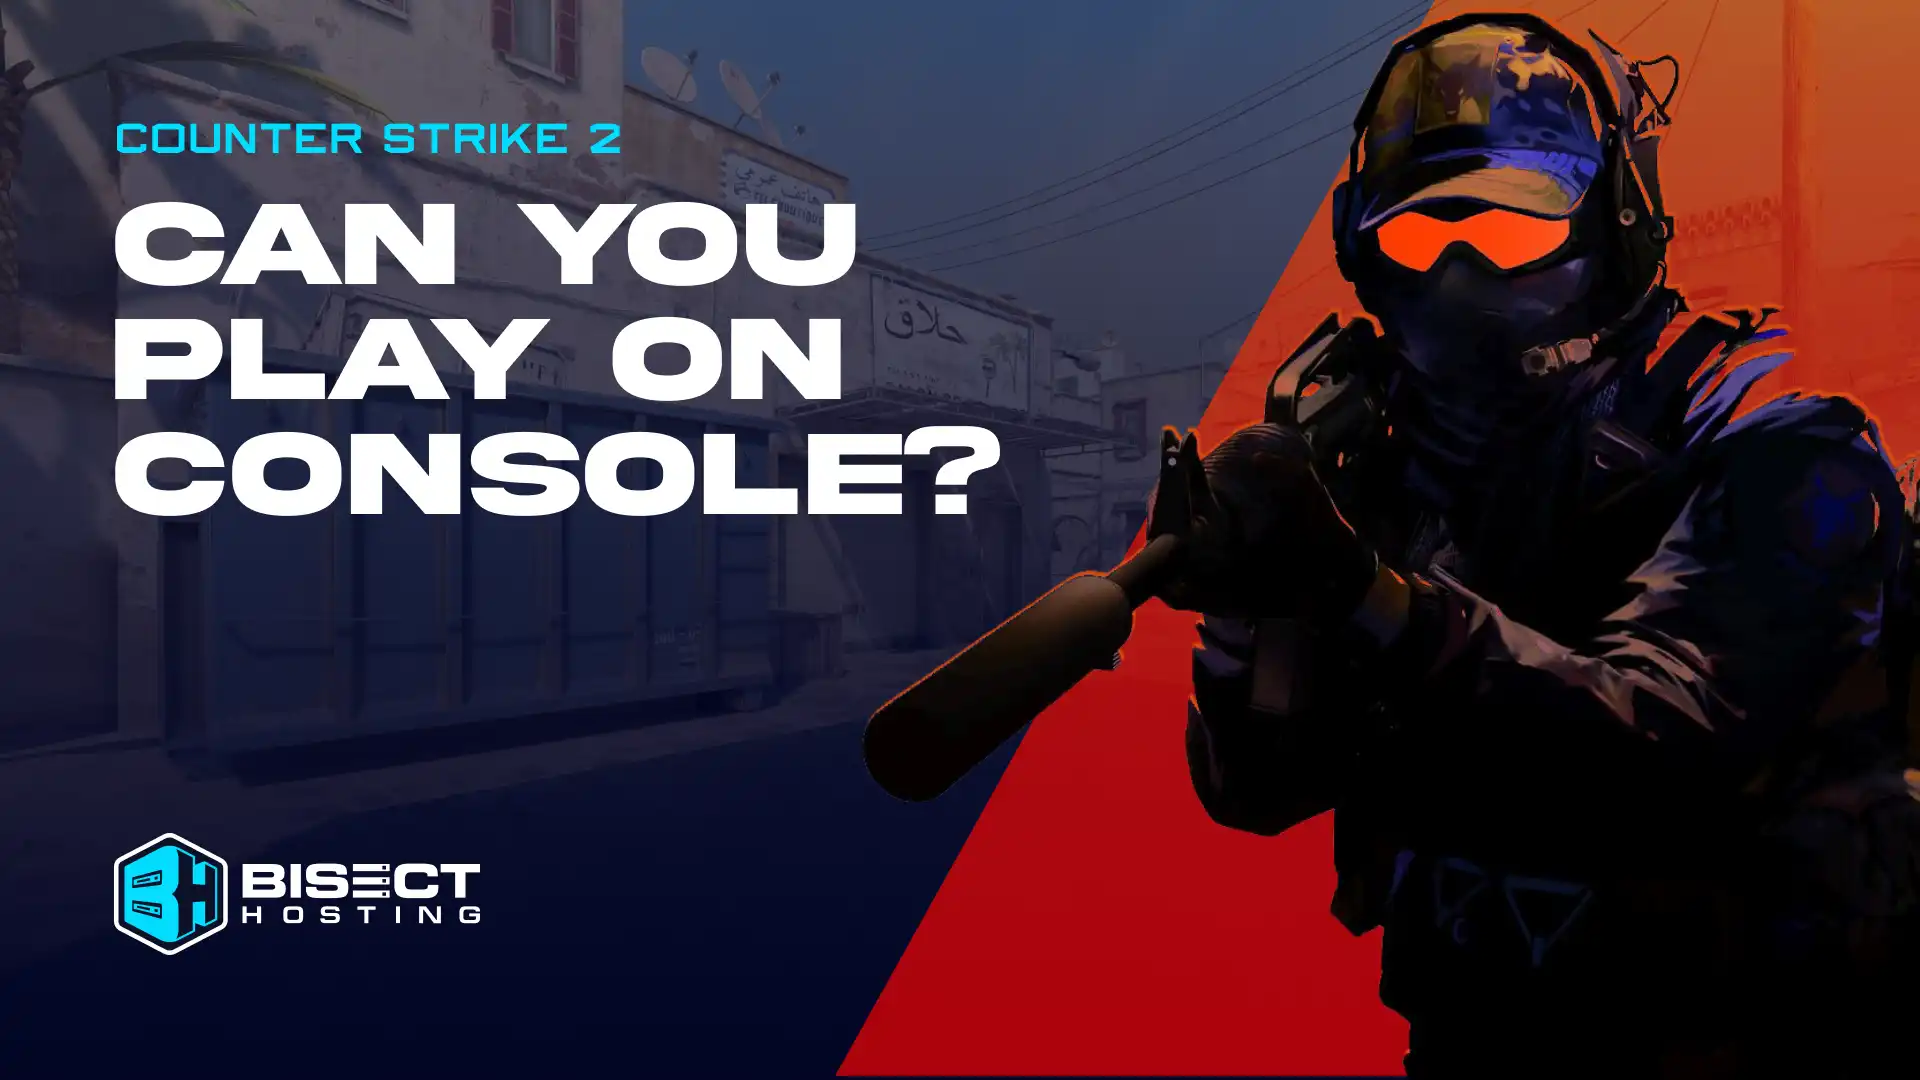 Is Counter Strike 2 on Console?